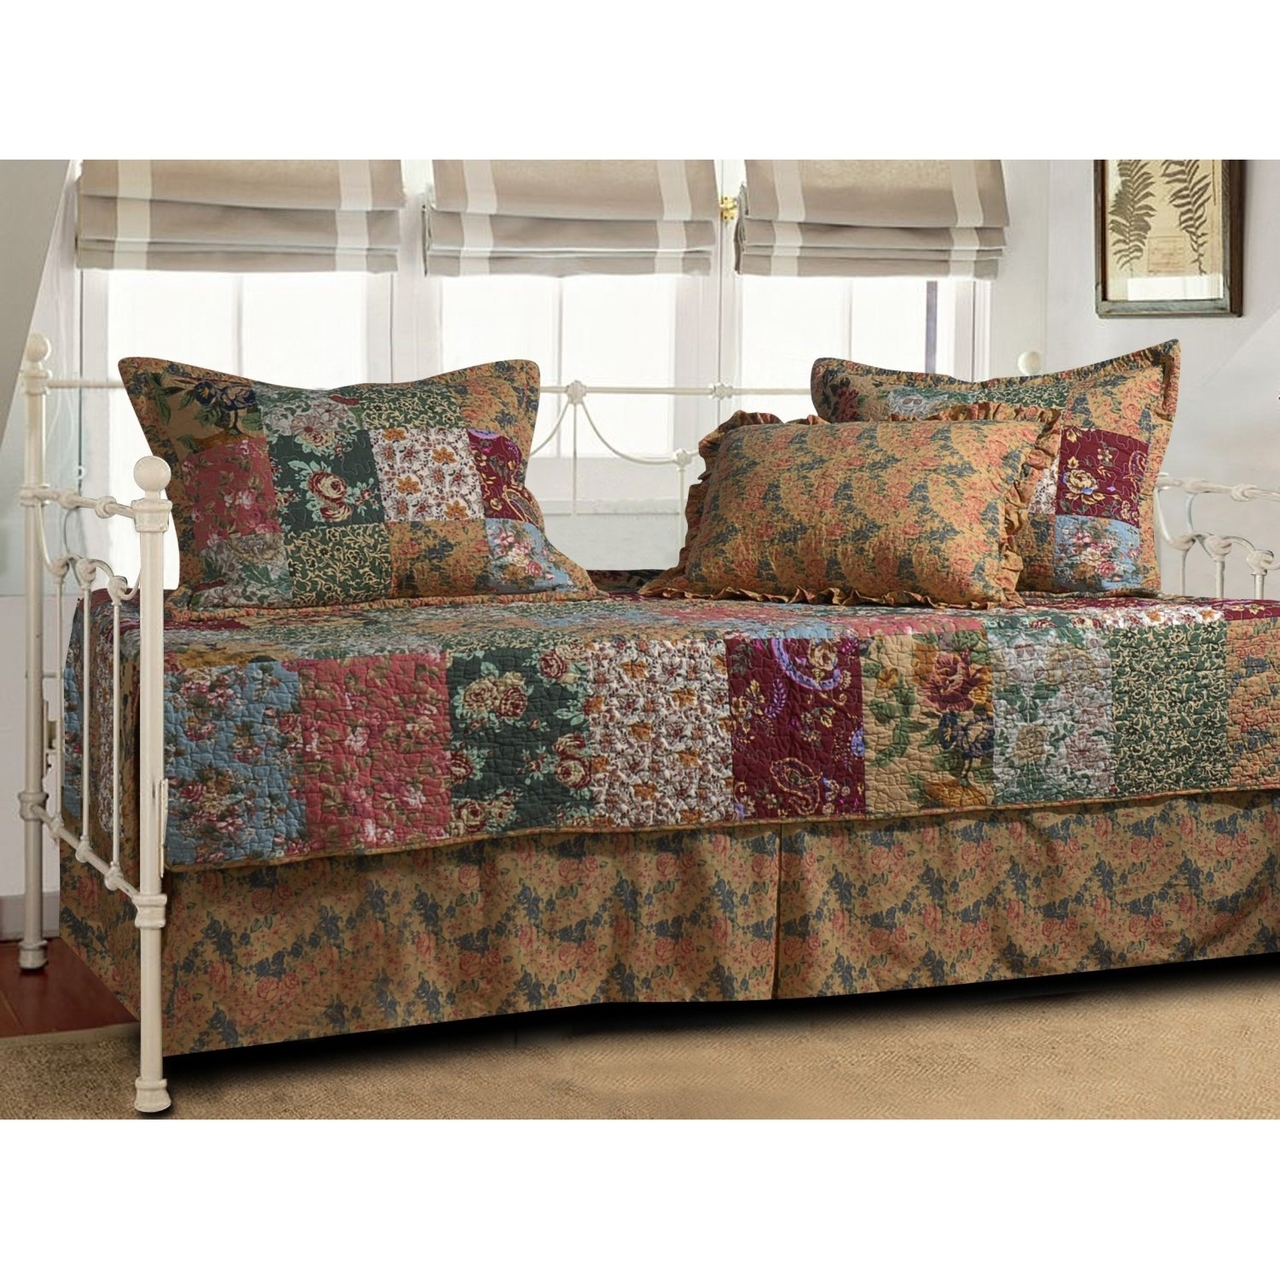 floral daybed bedding sets photo - 9